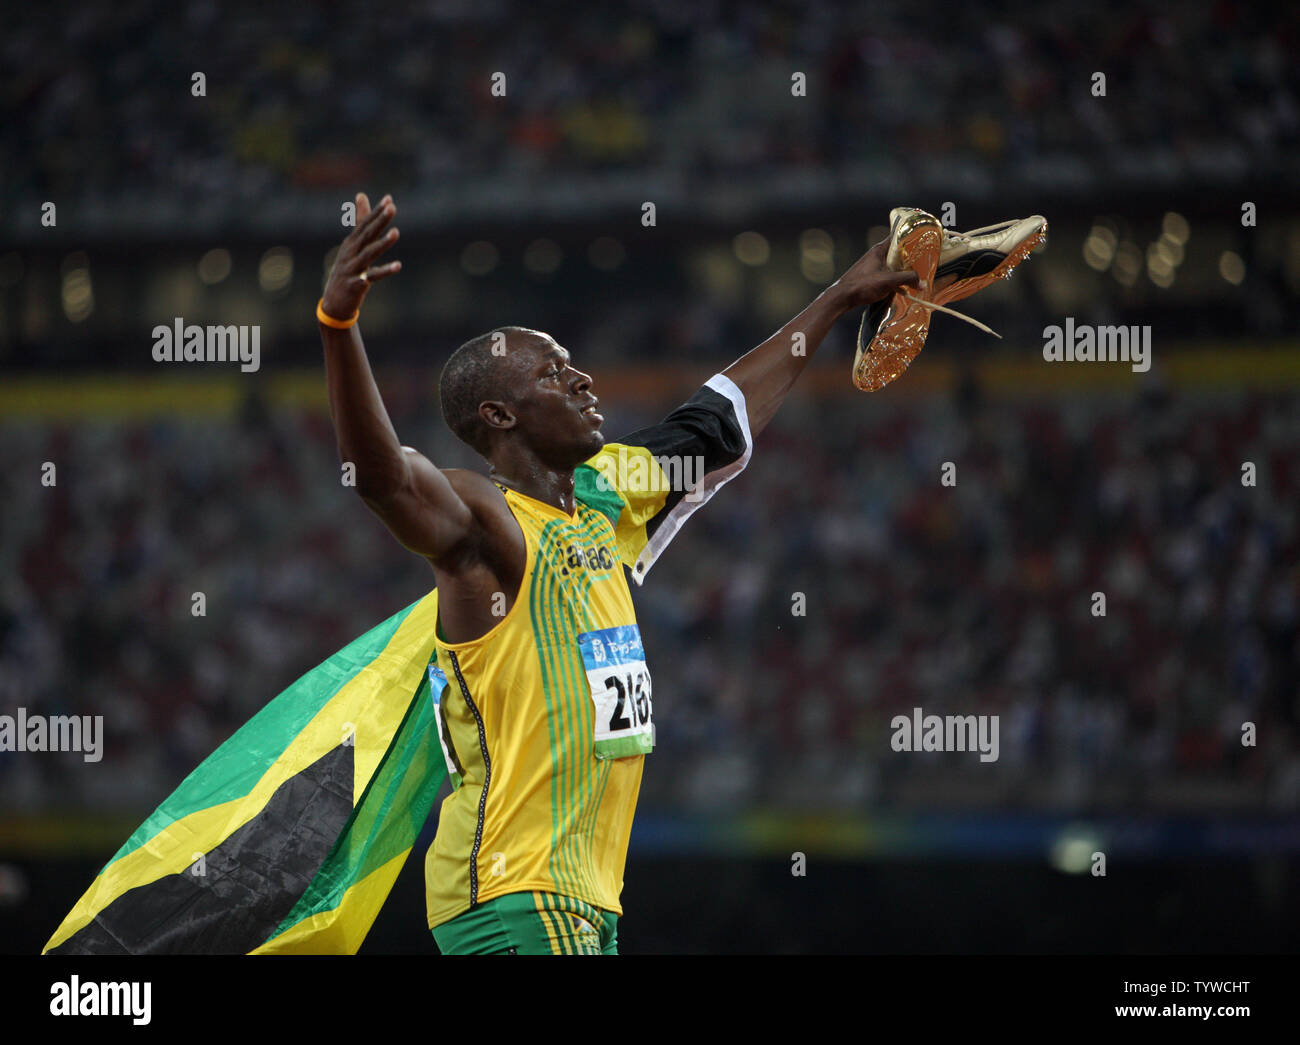 Jamaica's Usain Bolt  celebrates after setting a world record time of 9.69 in the Men's 100m at the 2008 Olympics in Beijing on August 16, 2008.    (UPI Photo/Terry Schmitt) Stock Photo